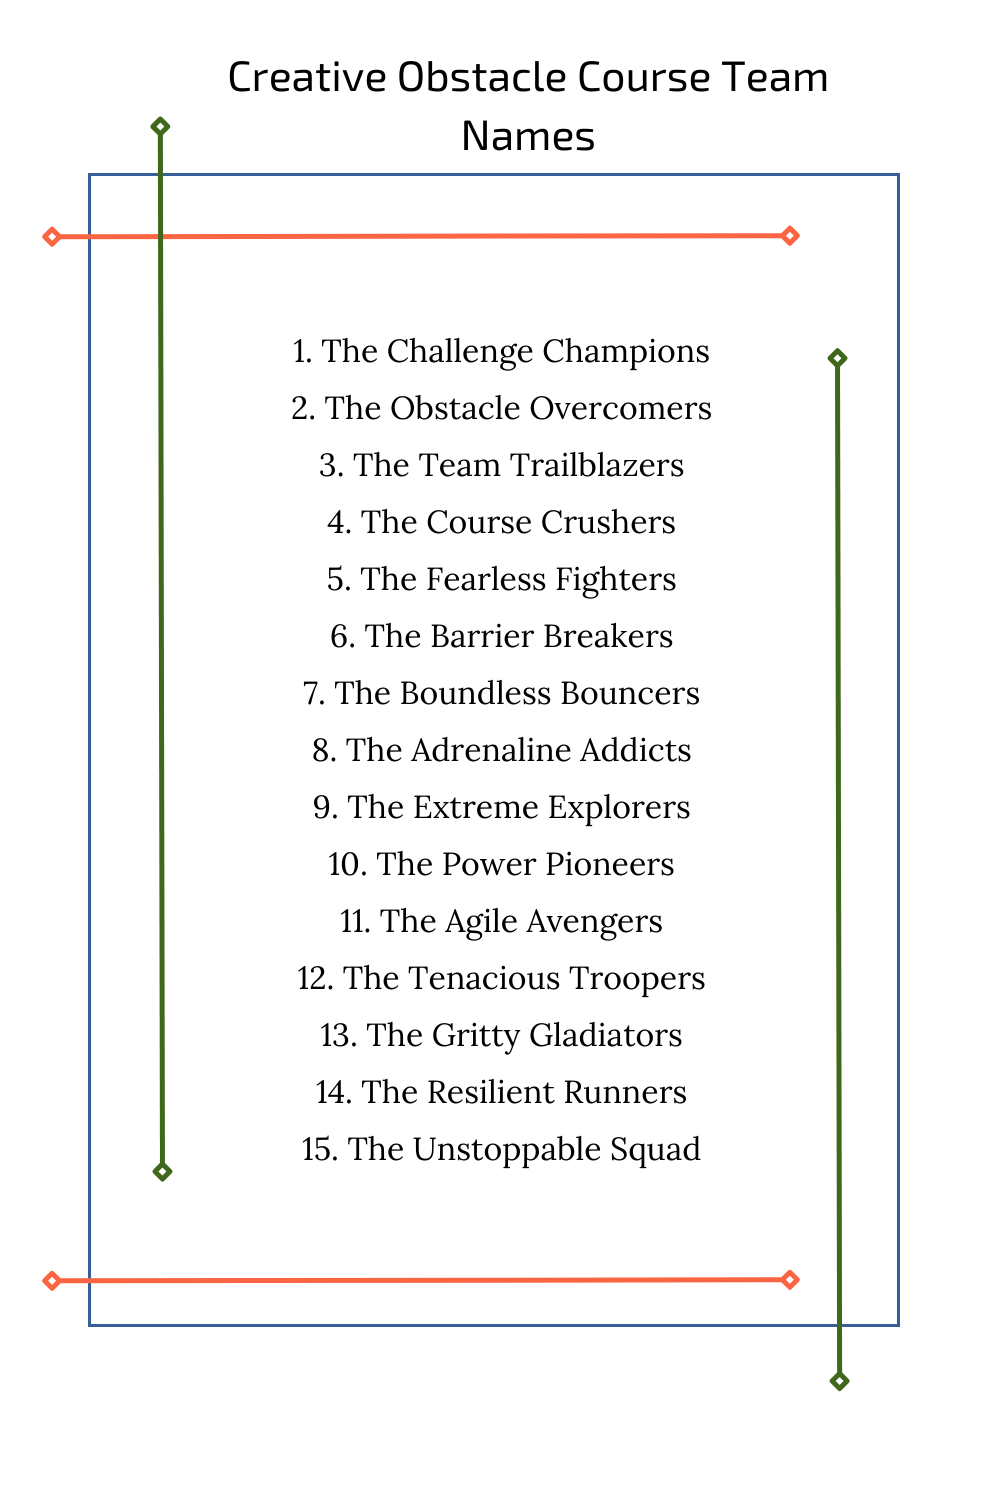 Creative Obstacle Course Team Names